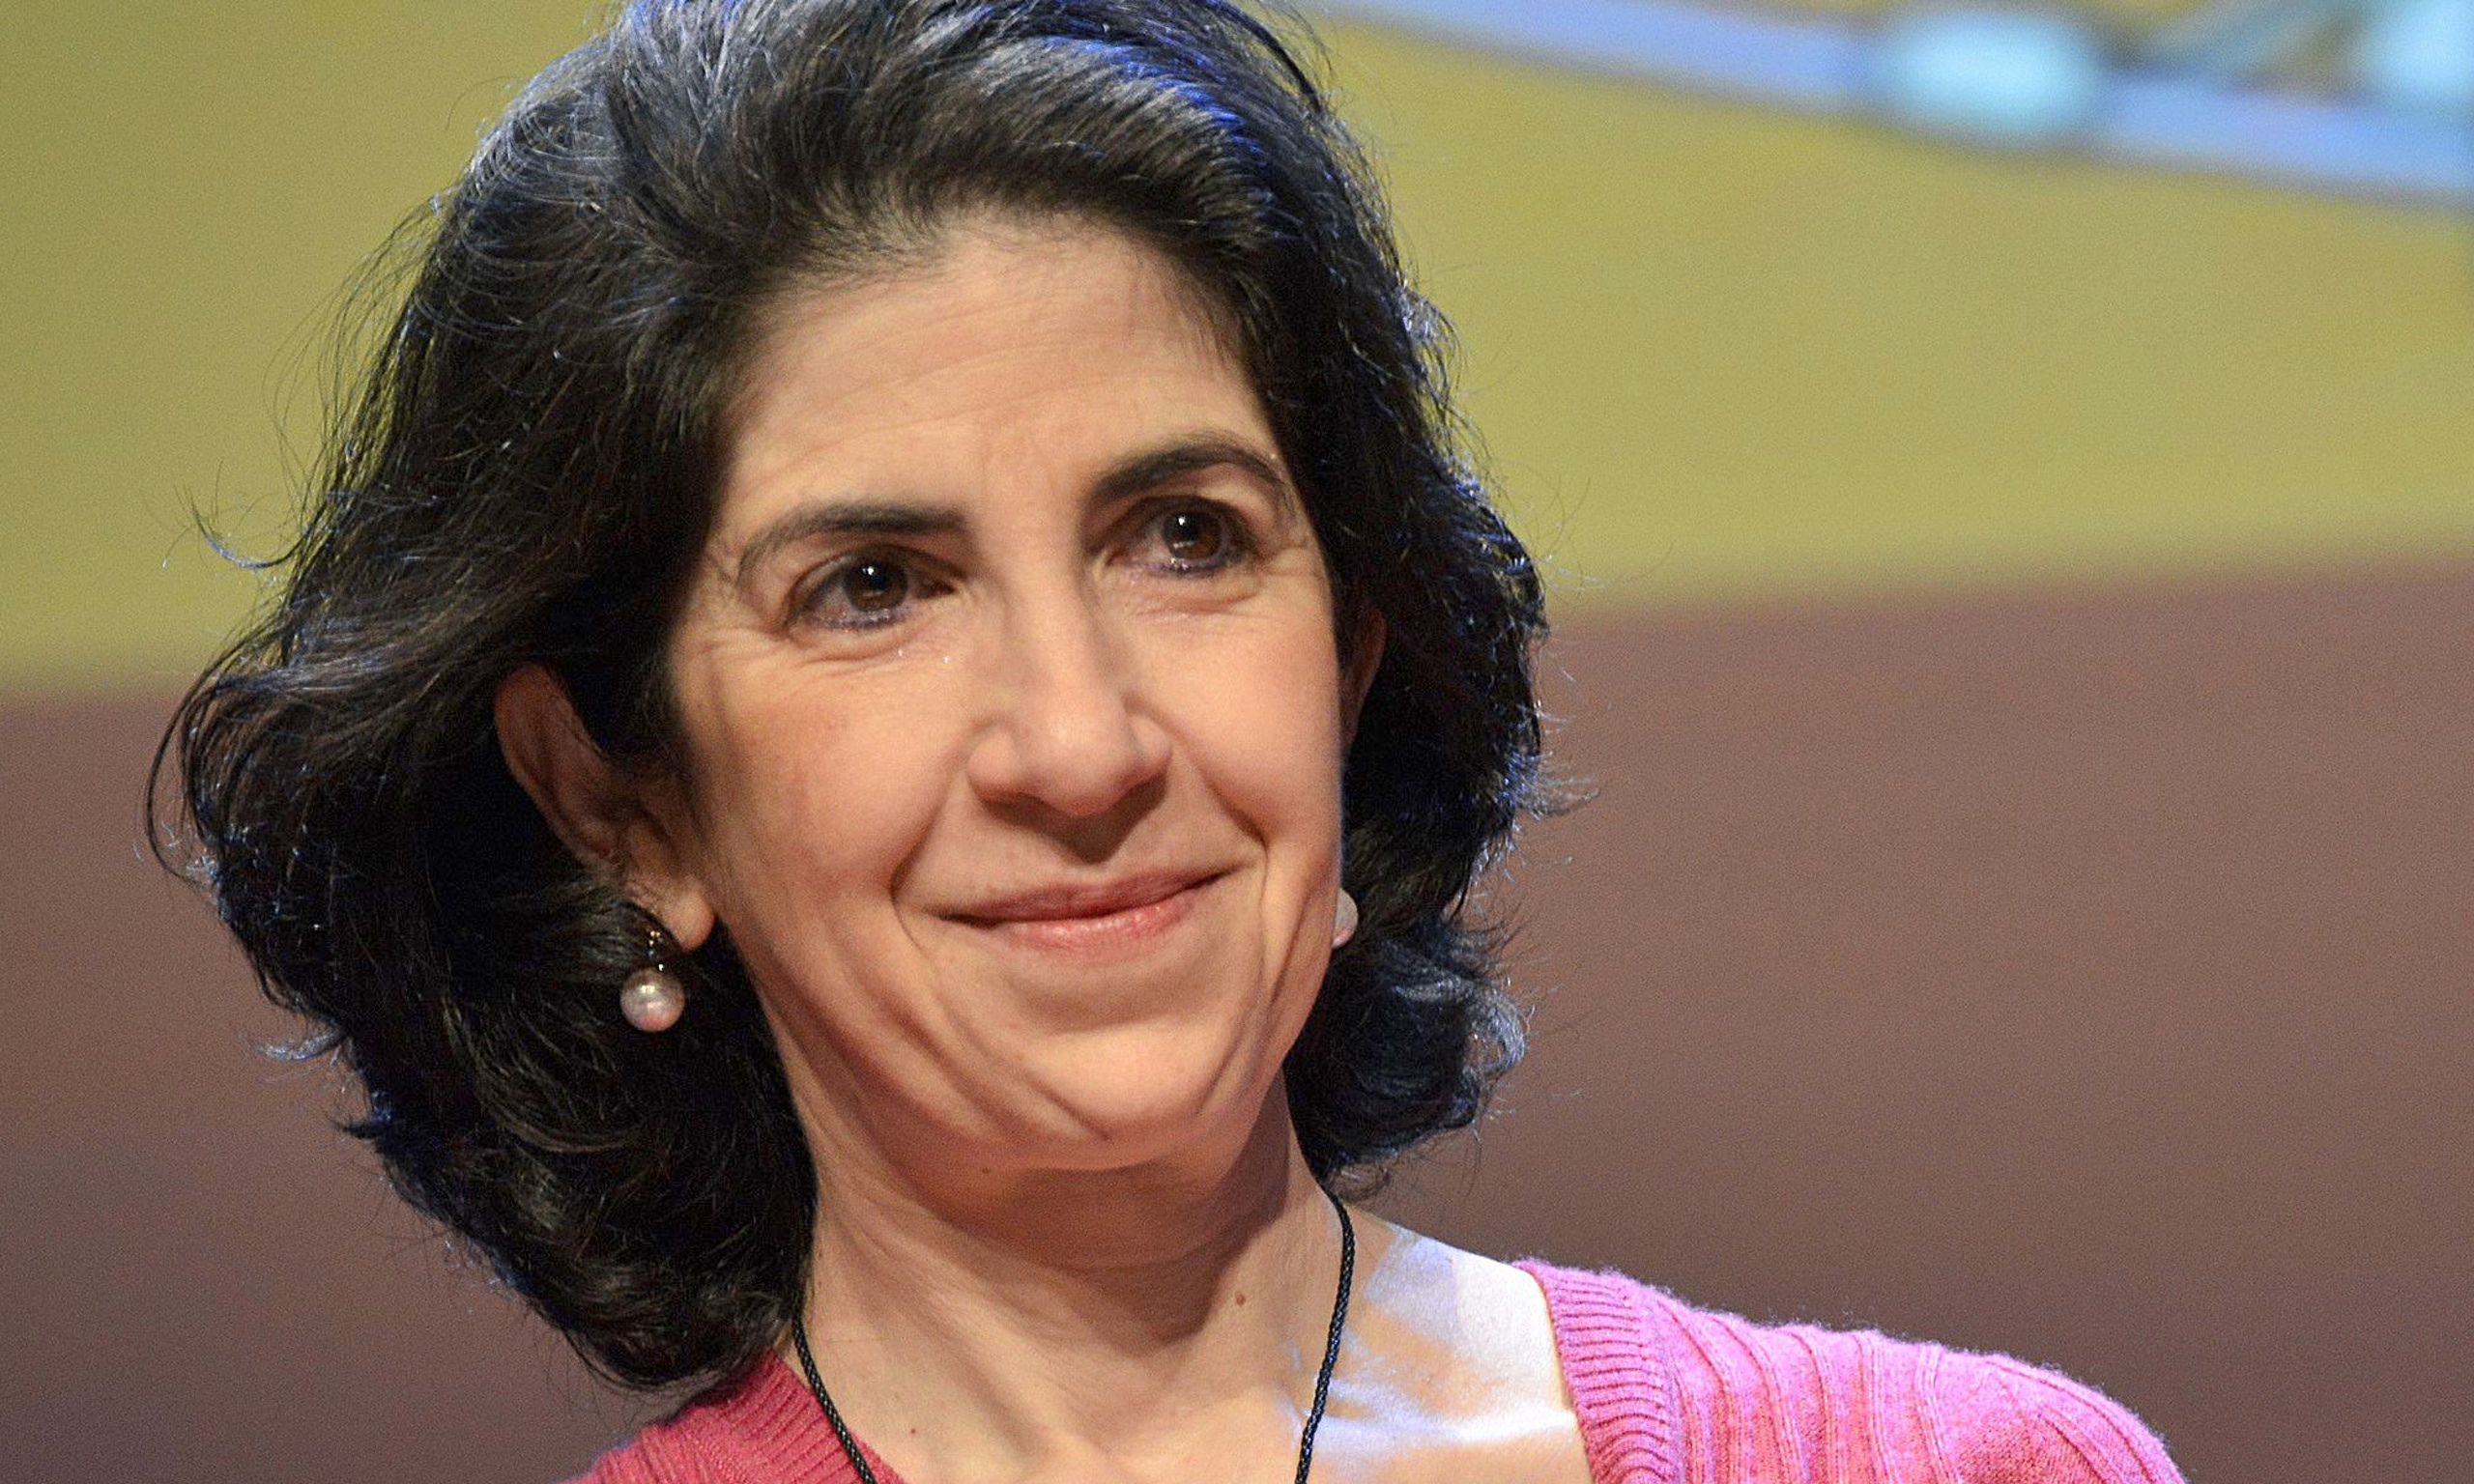 Fabiola Gianotti To Lead Cern Particle Physics Research Centre 